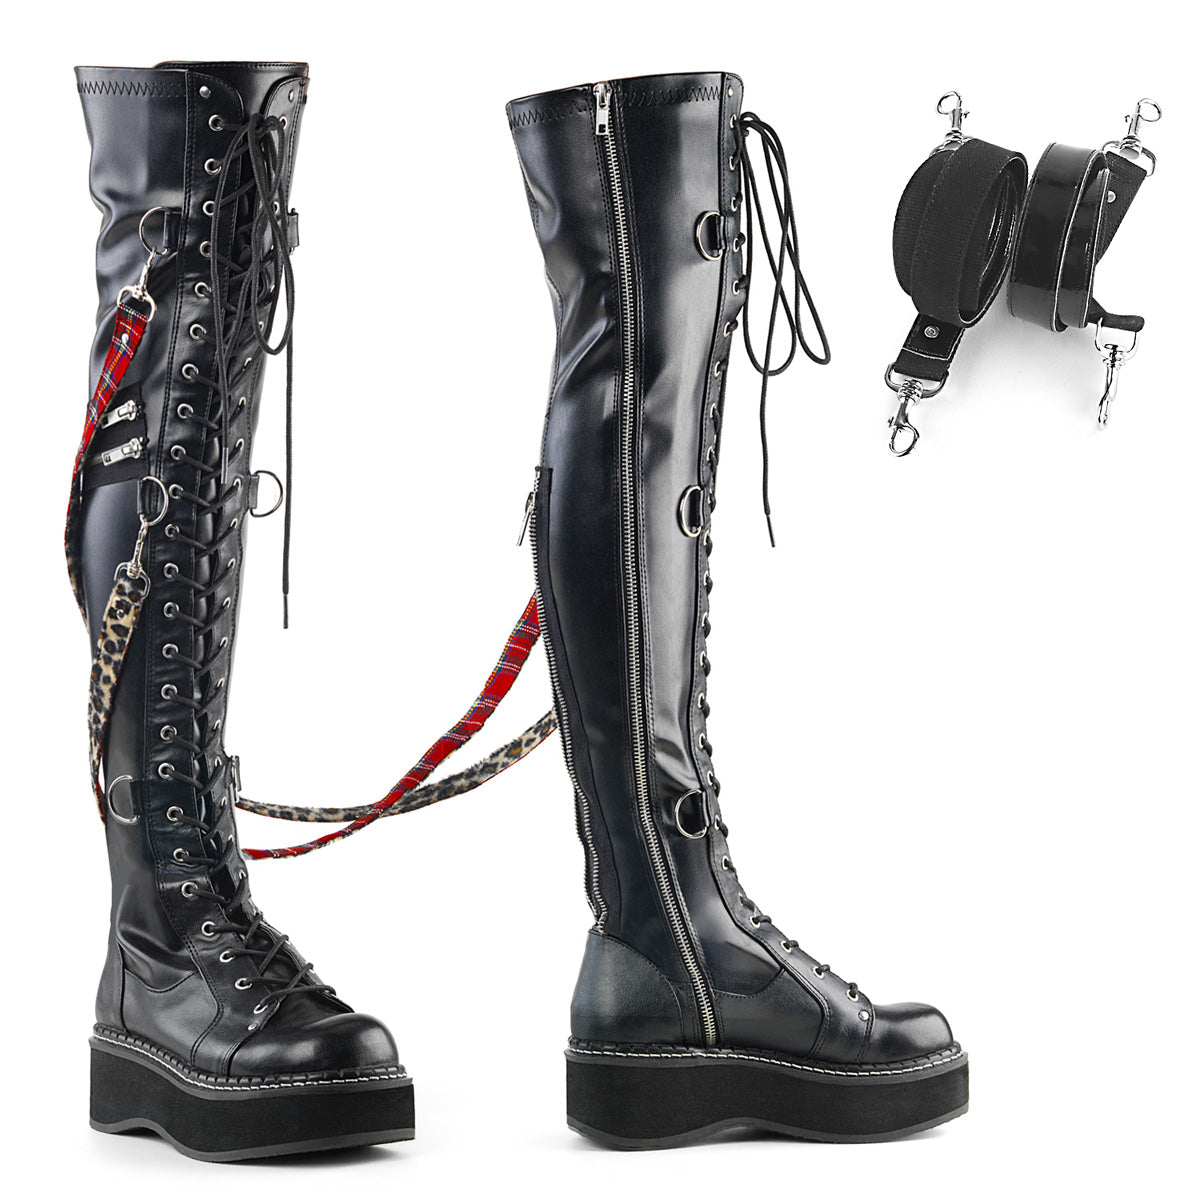 EMILY-377 Strap Over-The-Knee Lace-Up Boots by Demonia